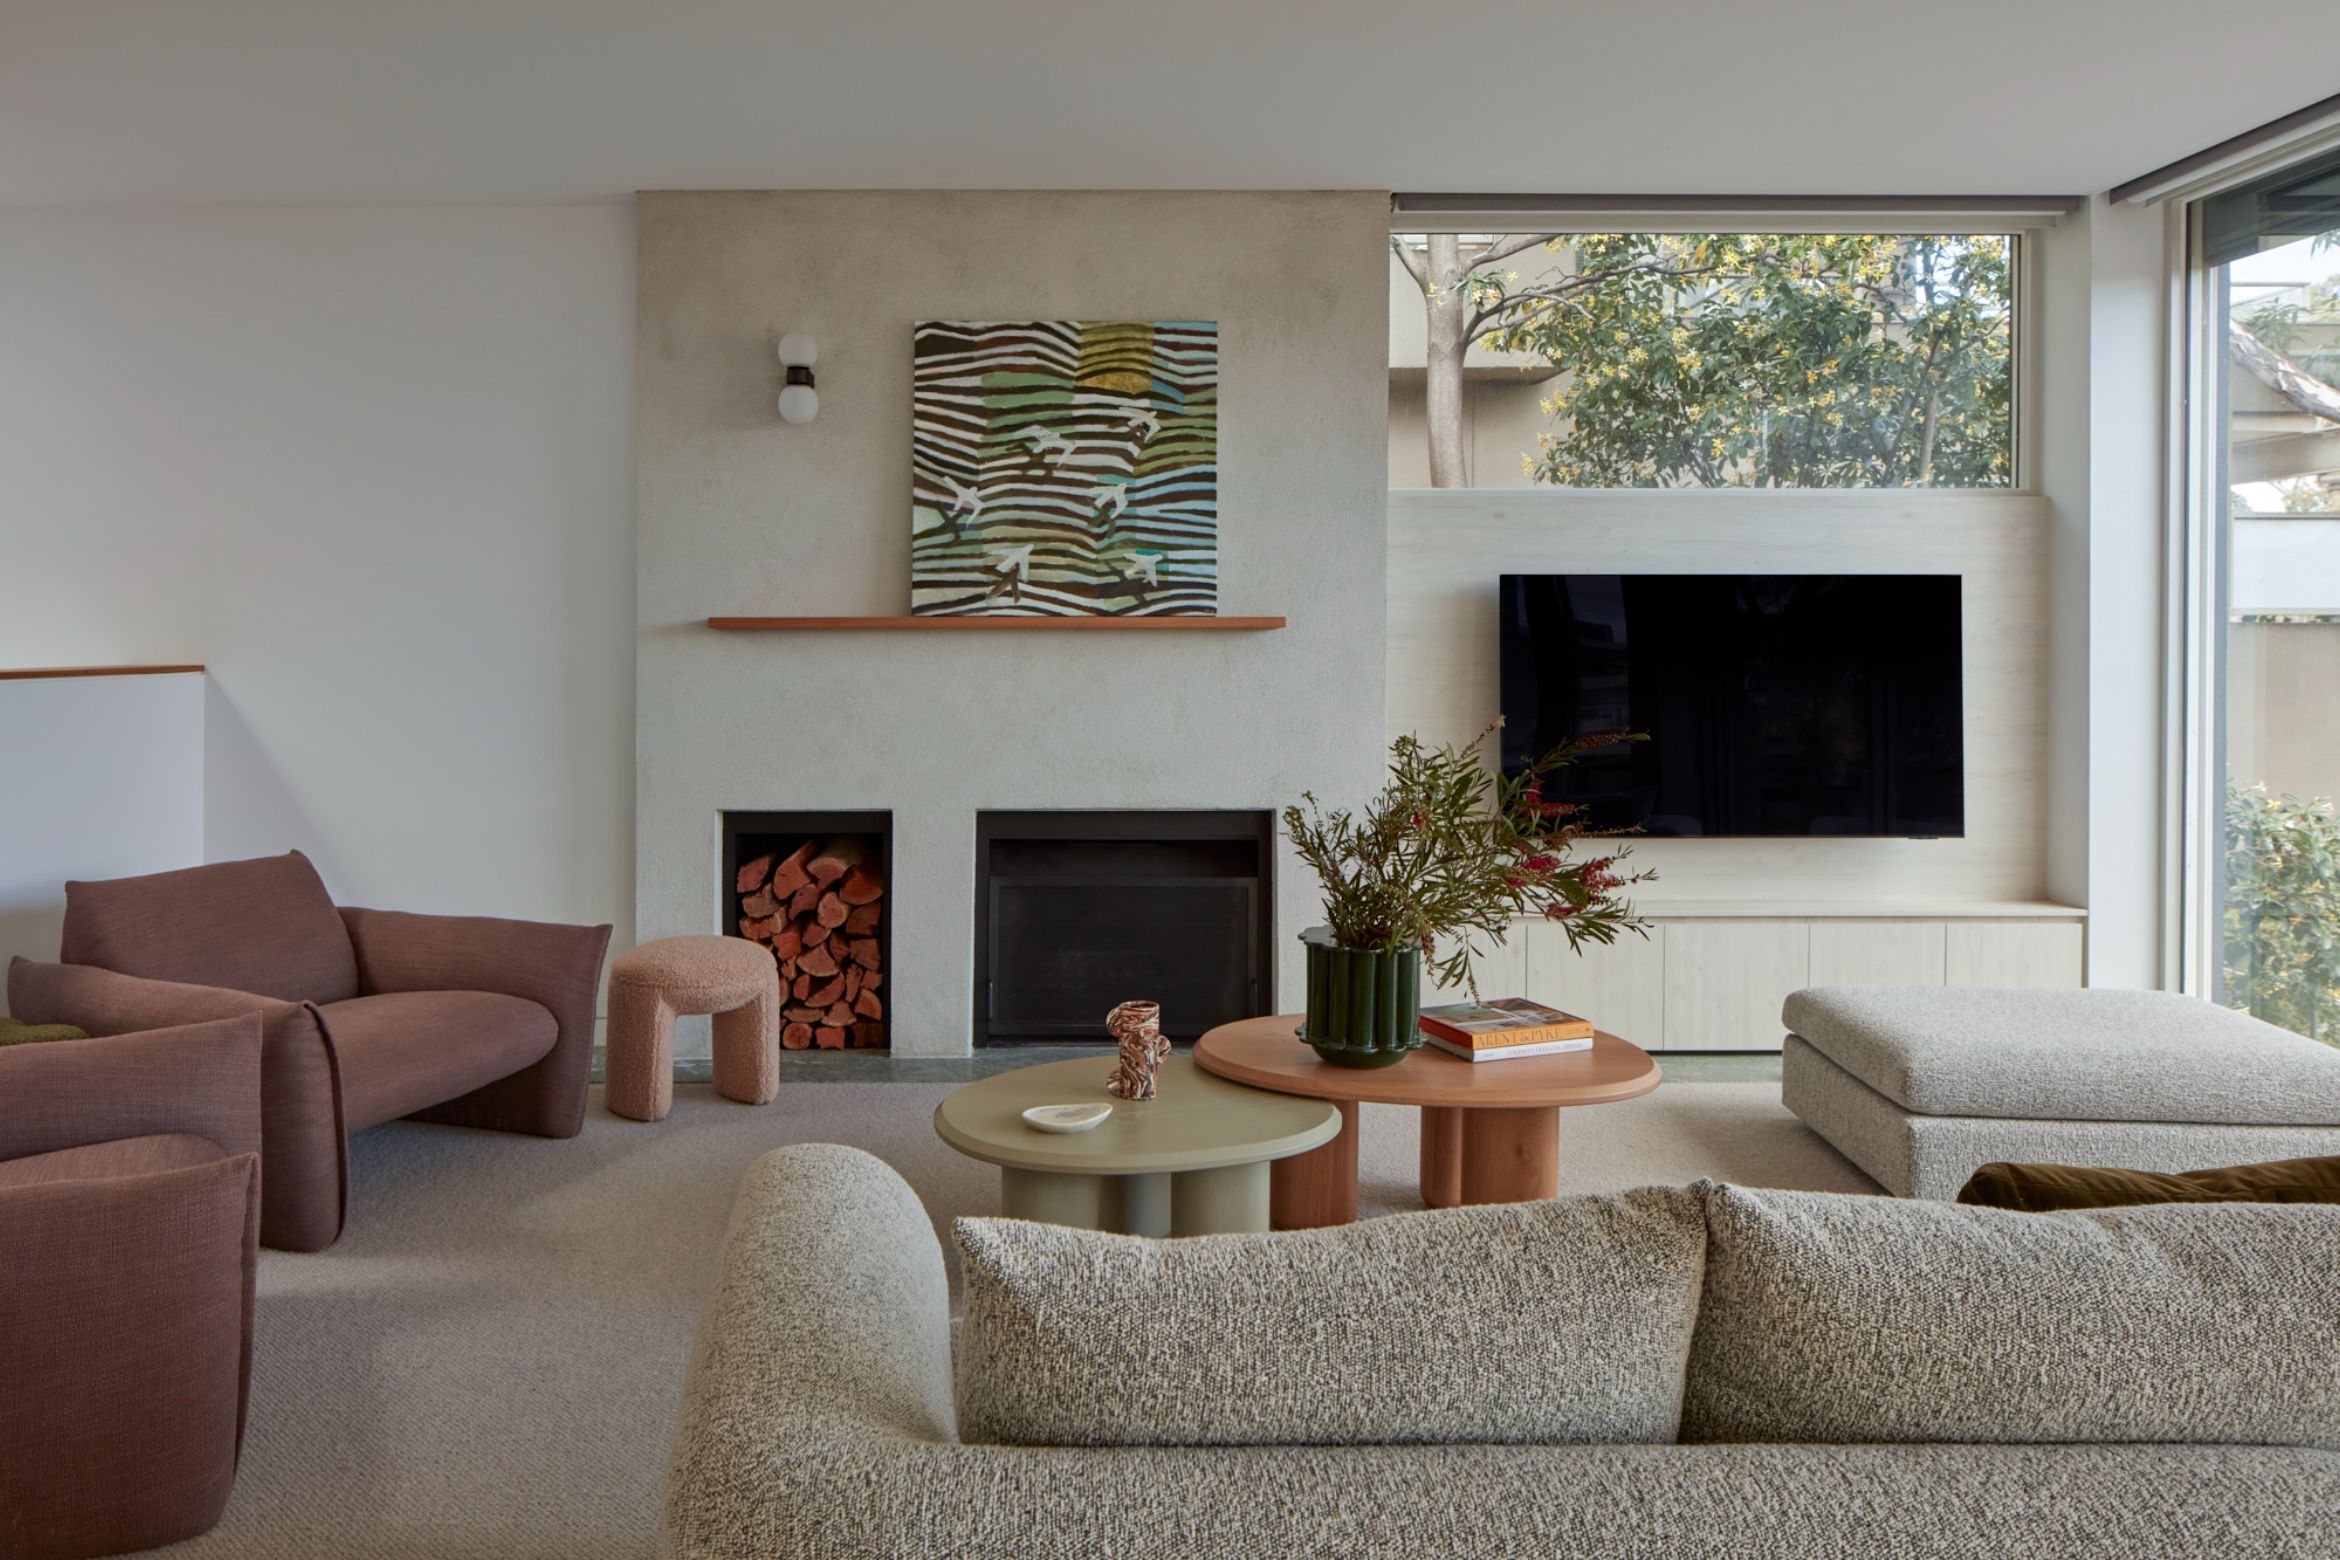 Touching beauty: Texture at the heart of Hawthorn house